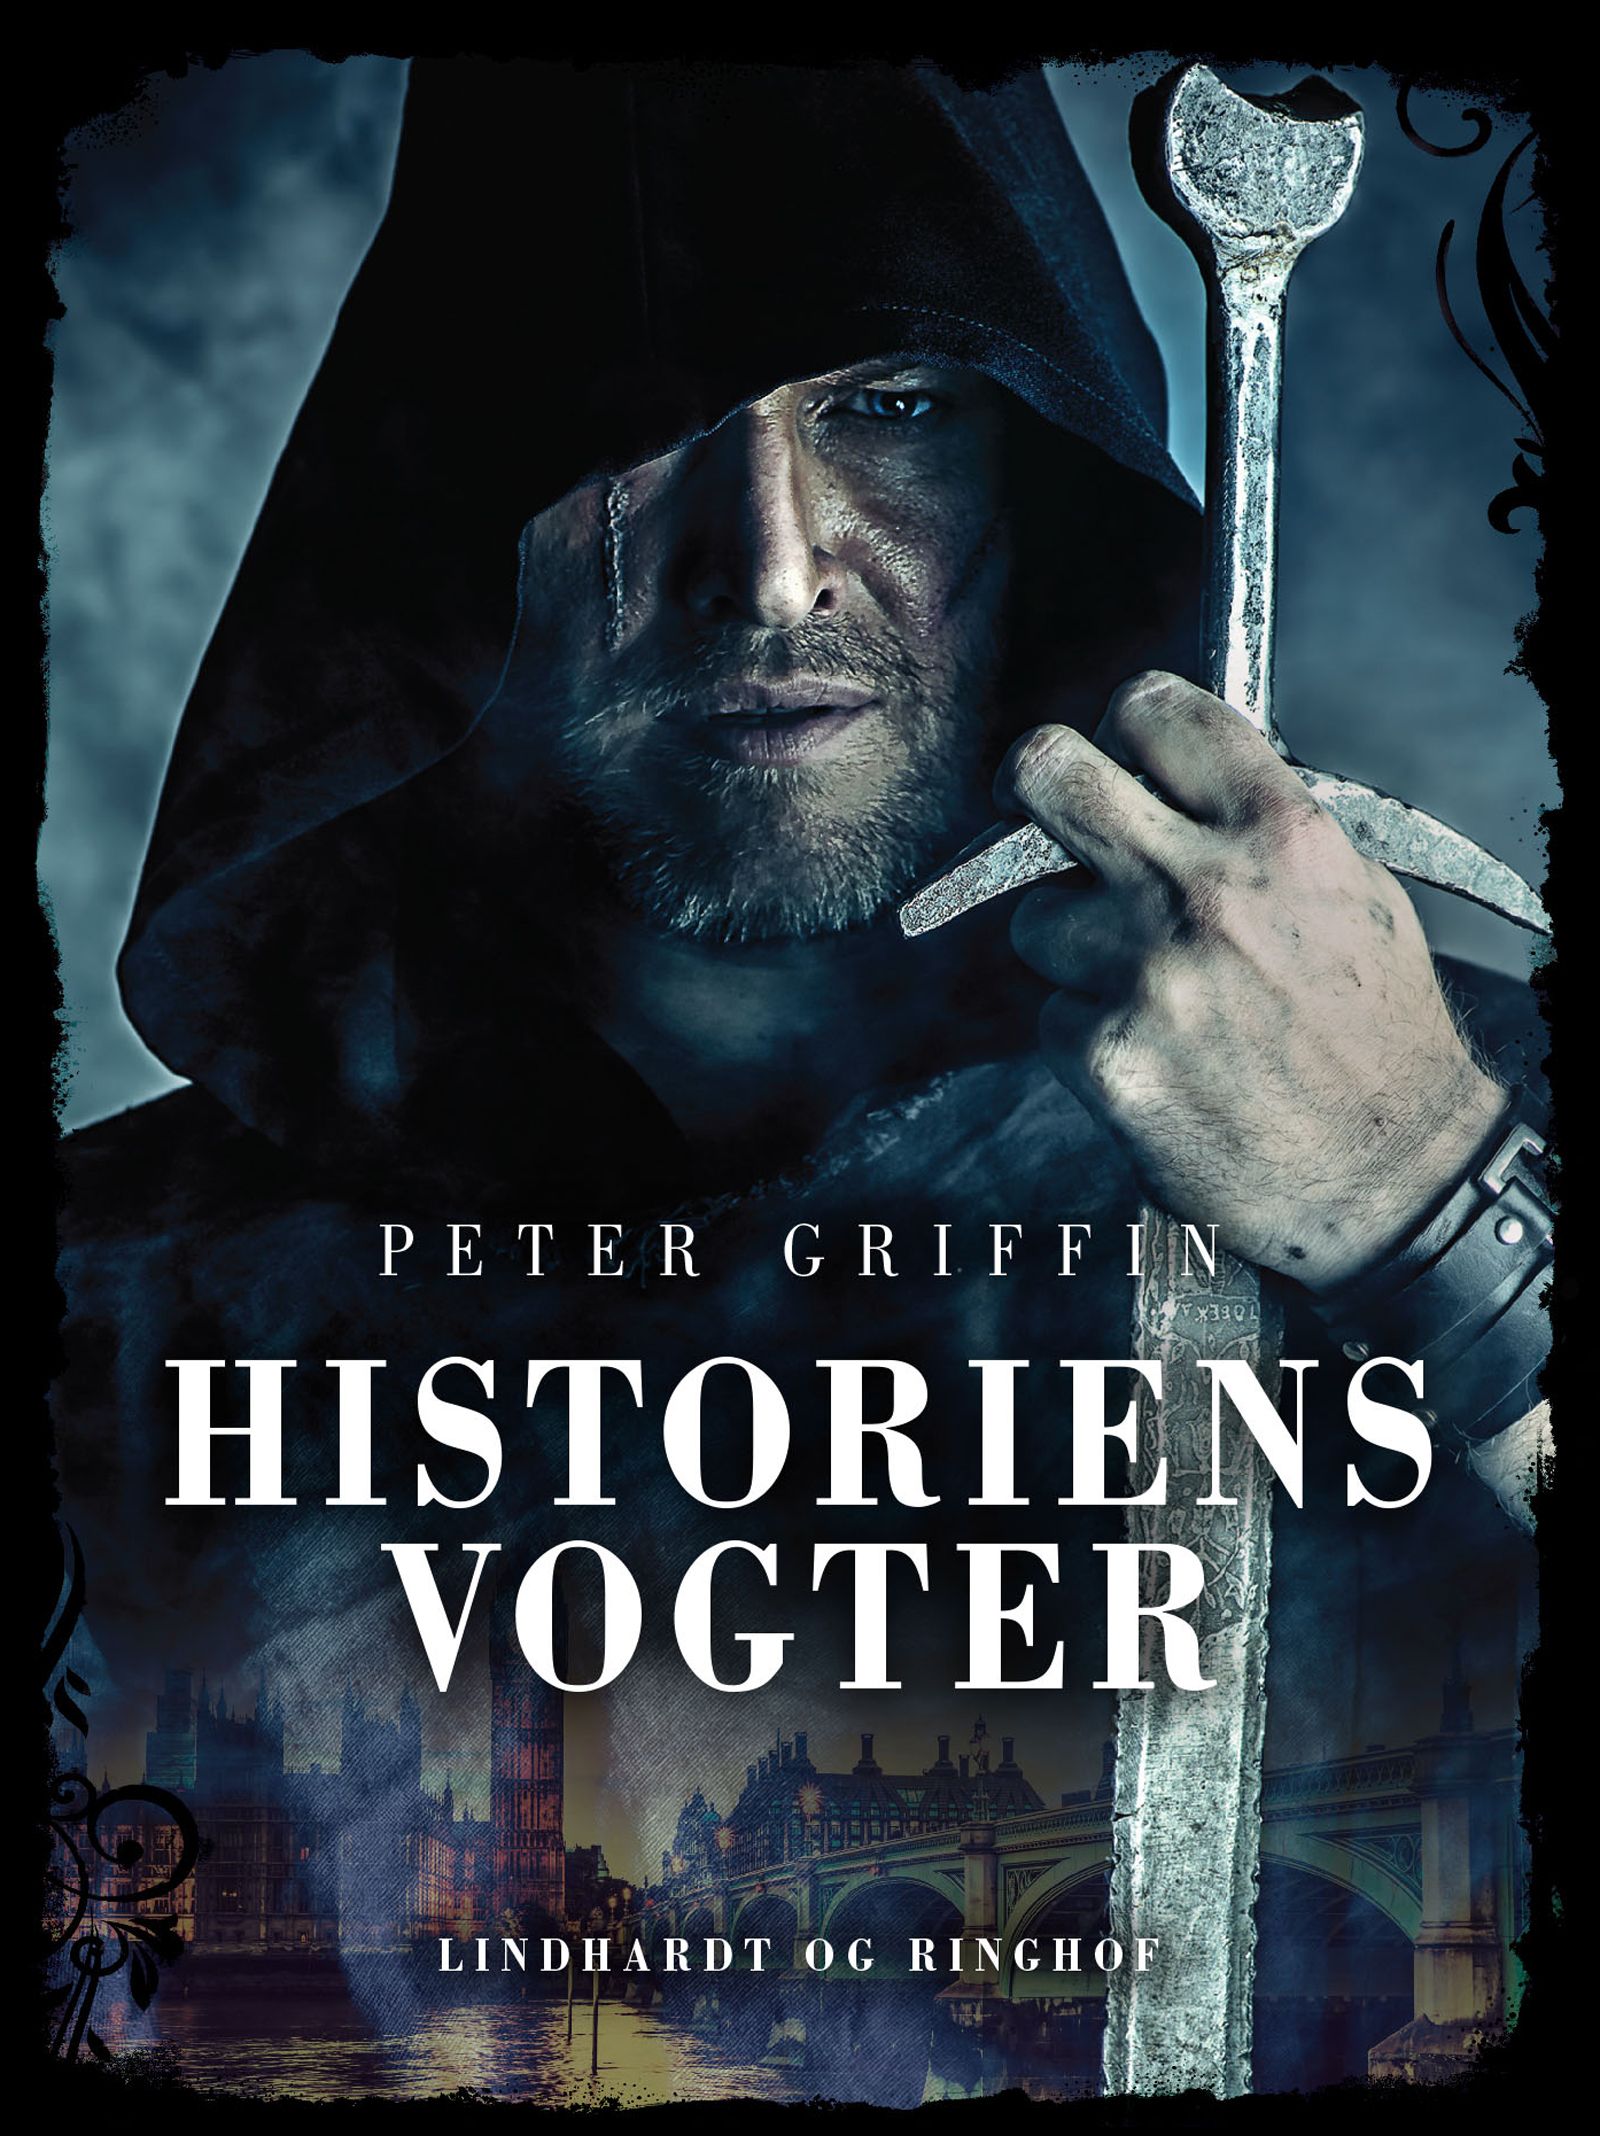 Historiens vogter, eBook by Peter Griffin